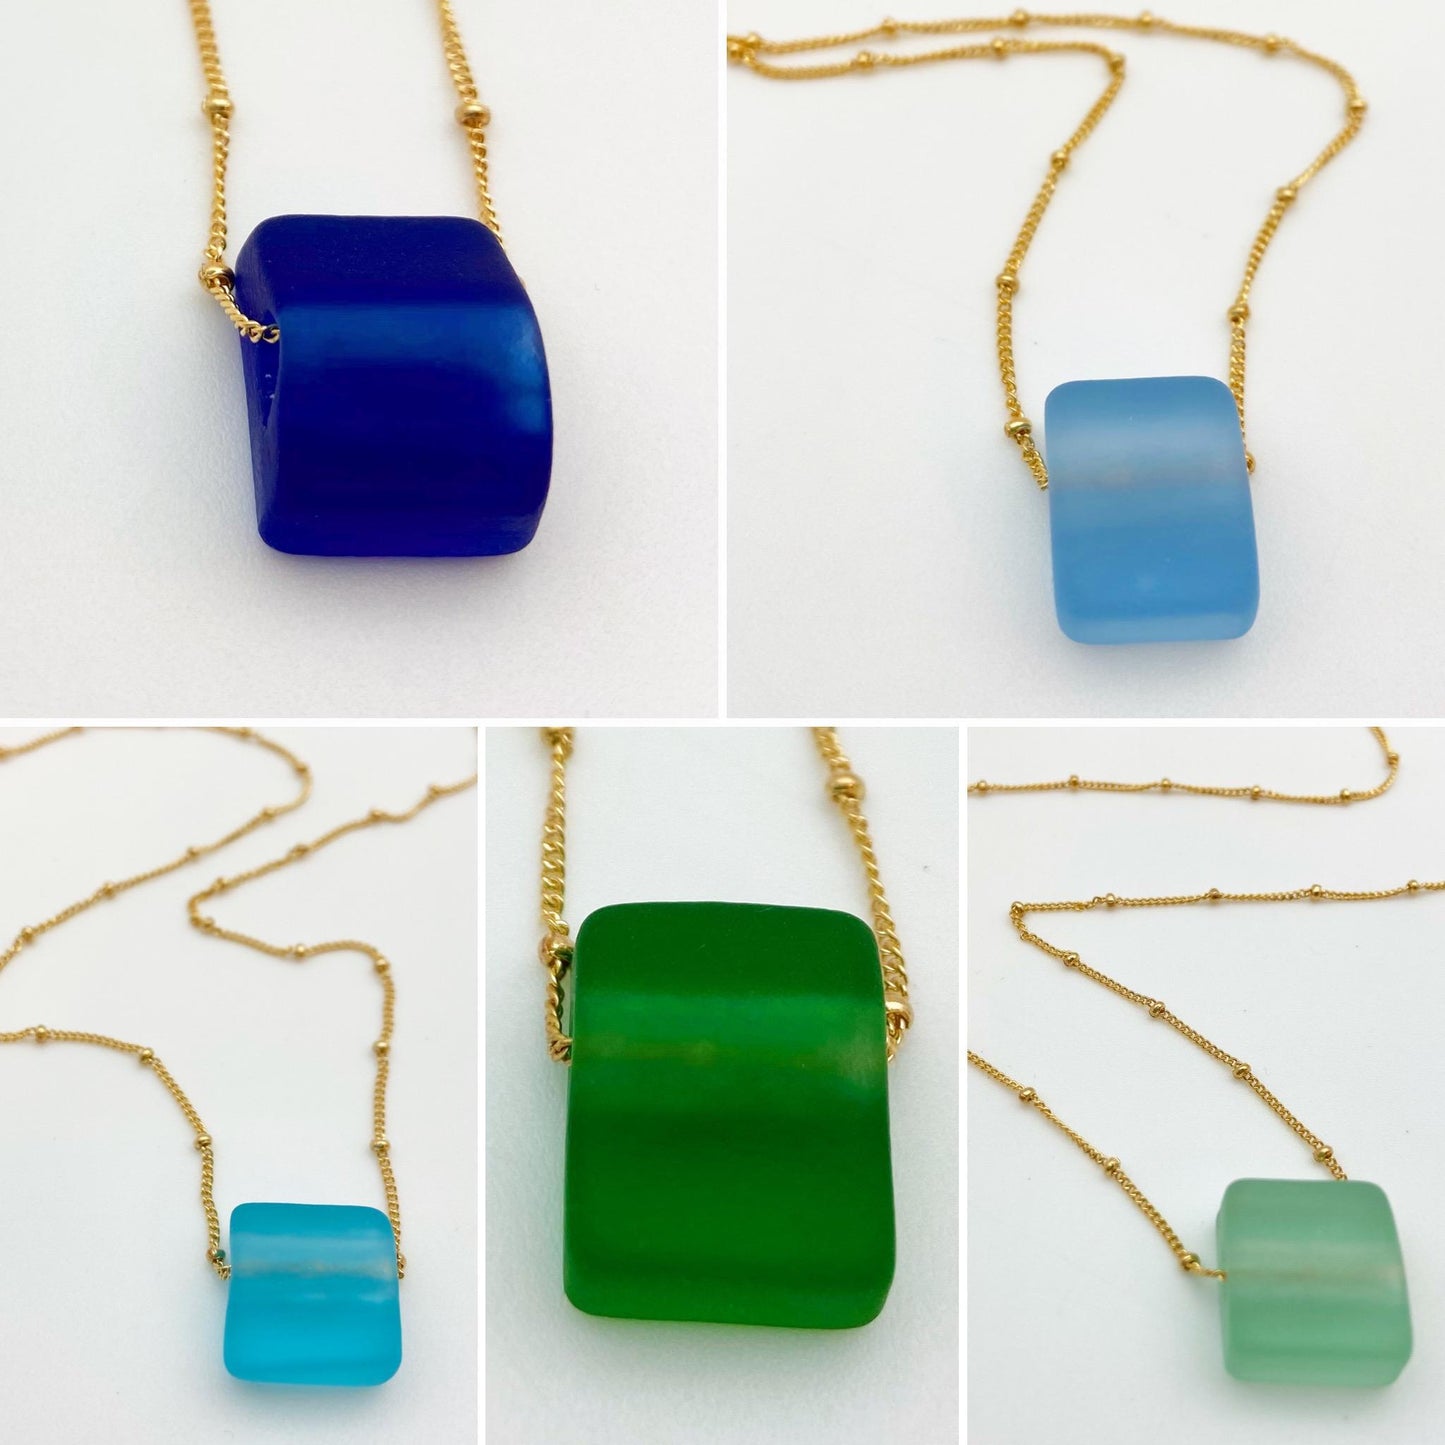 Necklace - Reclaimed Glass Cube on 14kt Goldfill - Cobalt